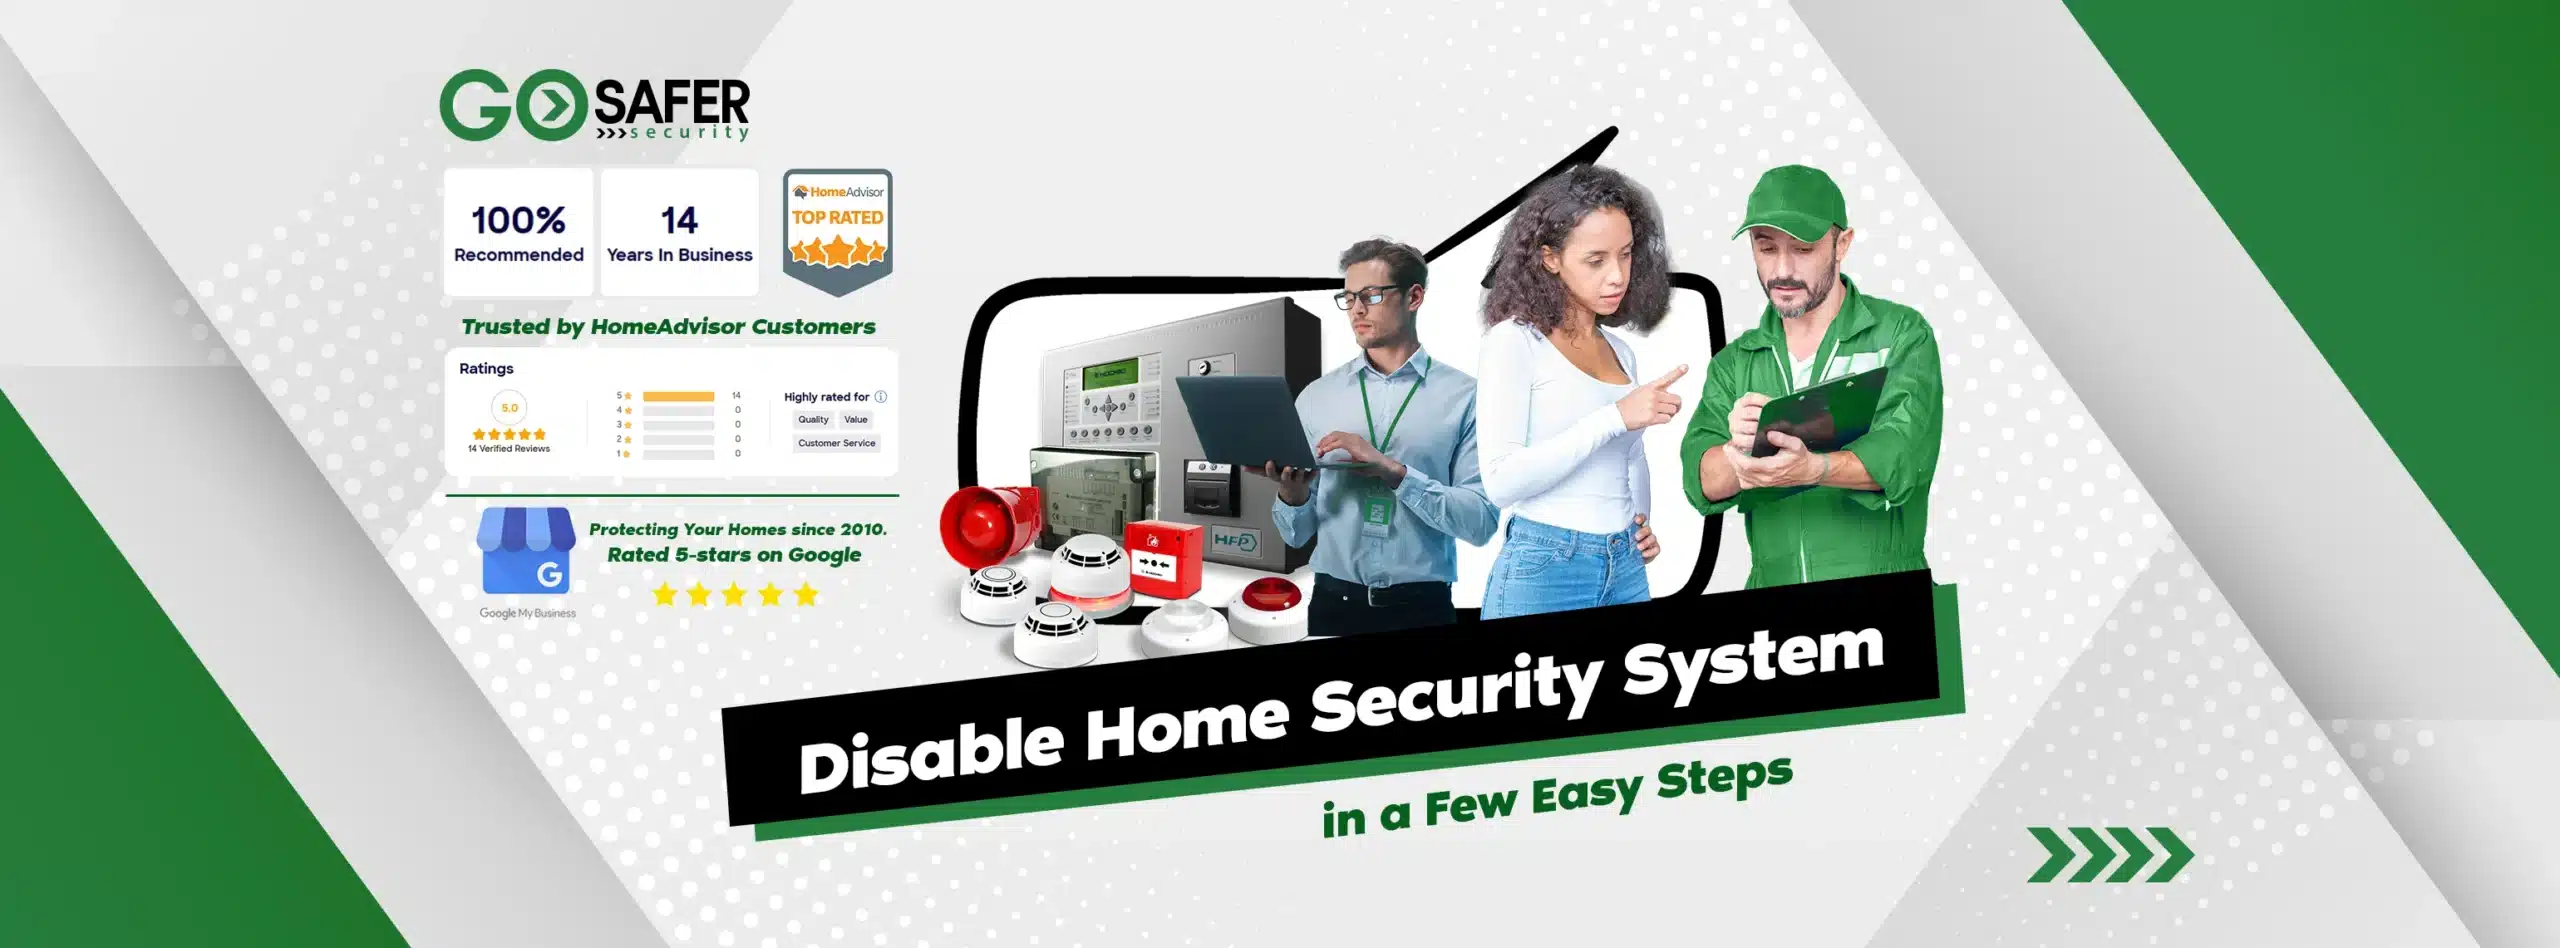 How to Disable Home Security System in A Few Easy Steps